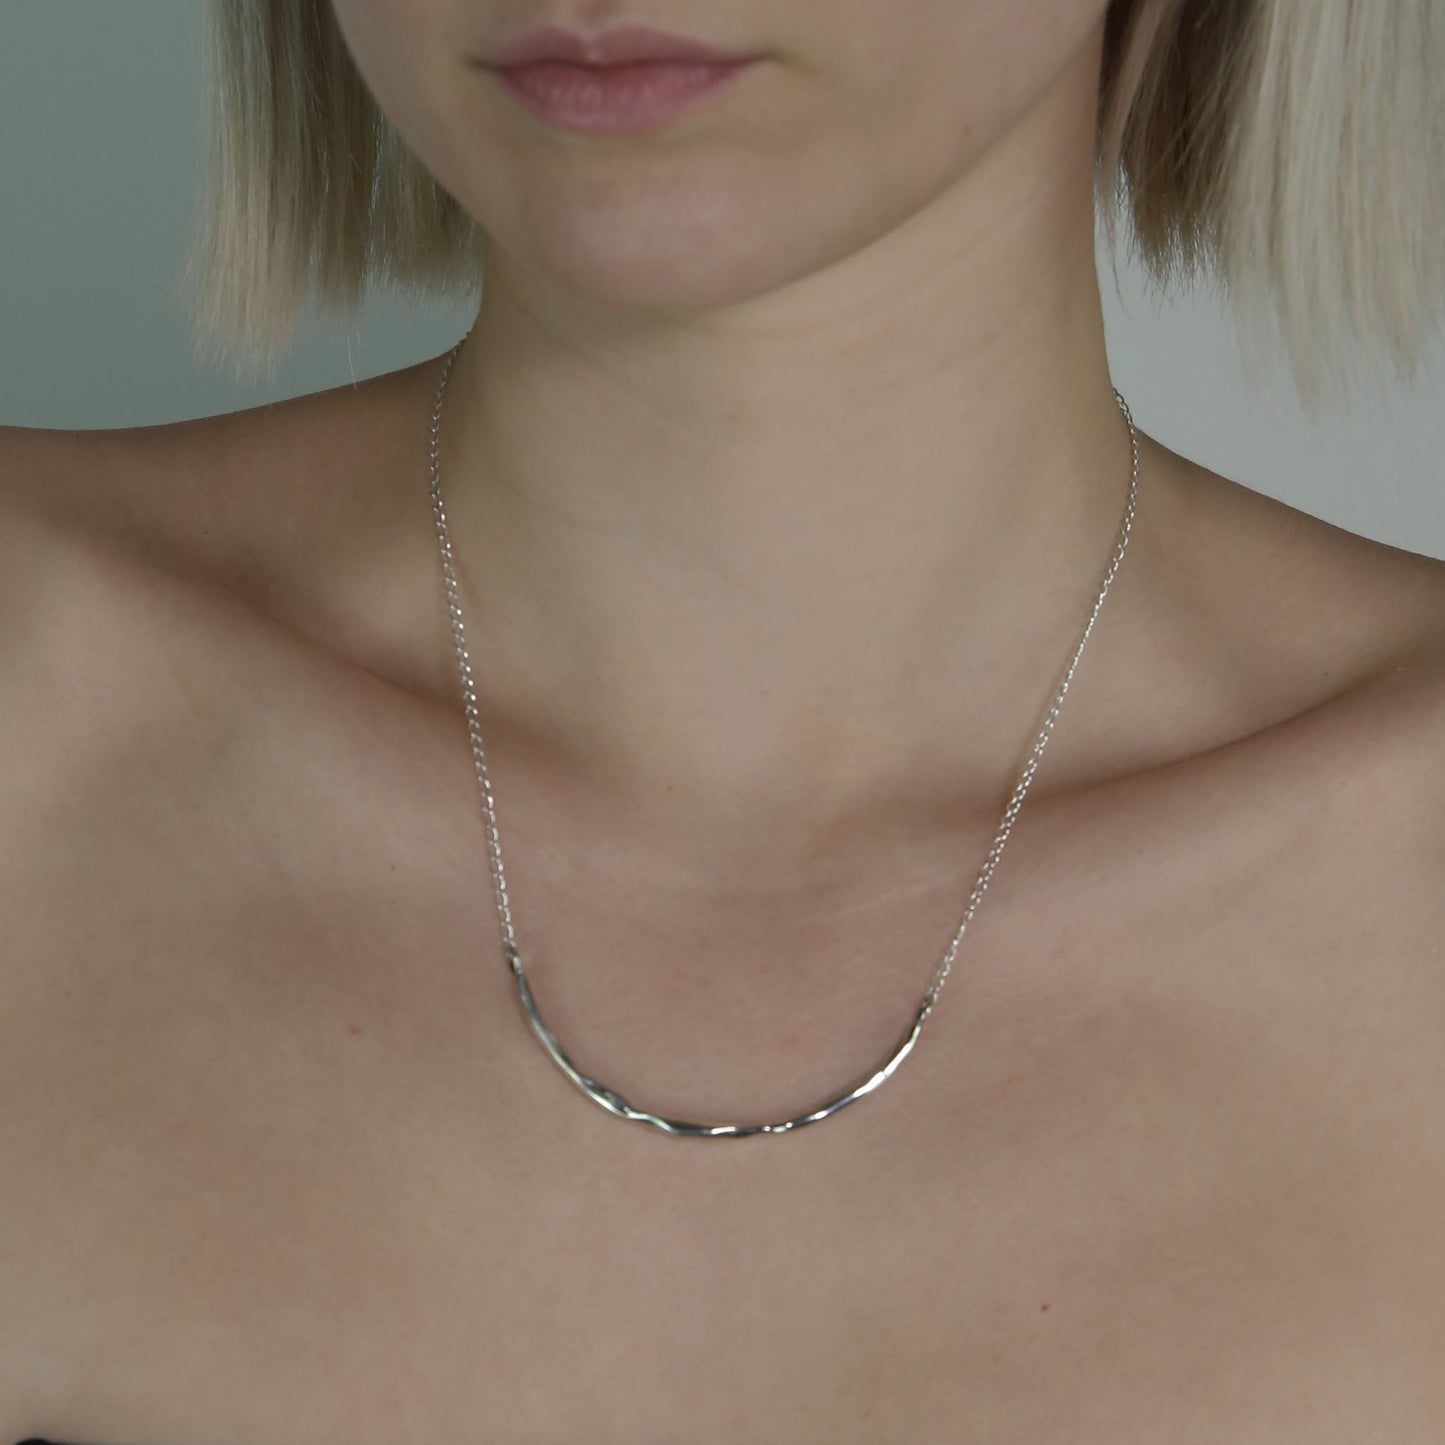 The Briliante necklace is a handmade piece crafted from sterling silver 925. It features a minimal silver strip with a textured appearance, providing a glossy finish while gracefully embracing the neck. 